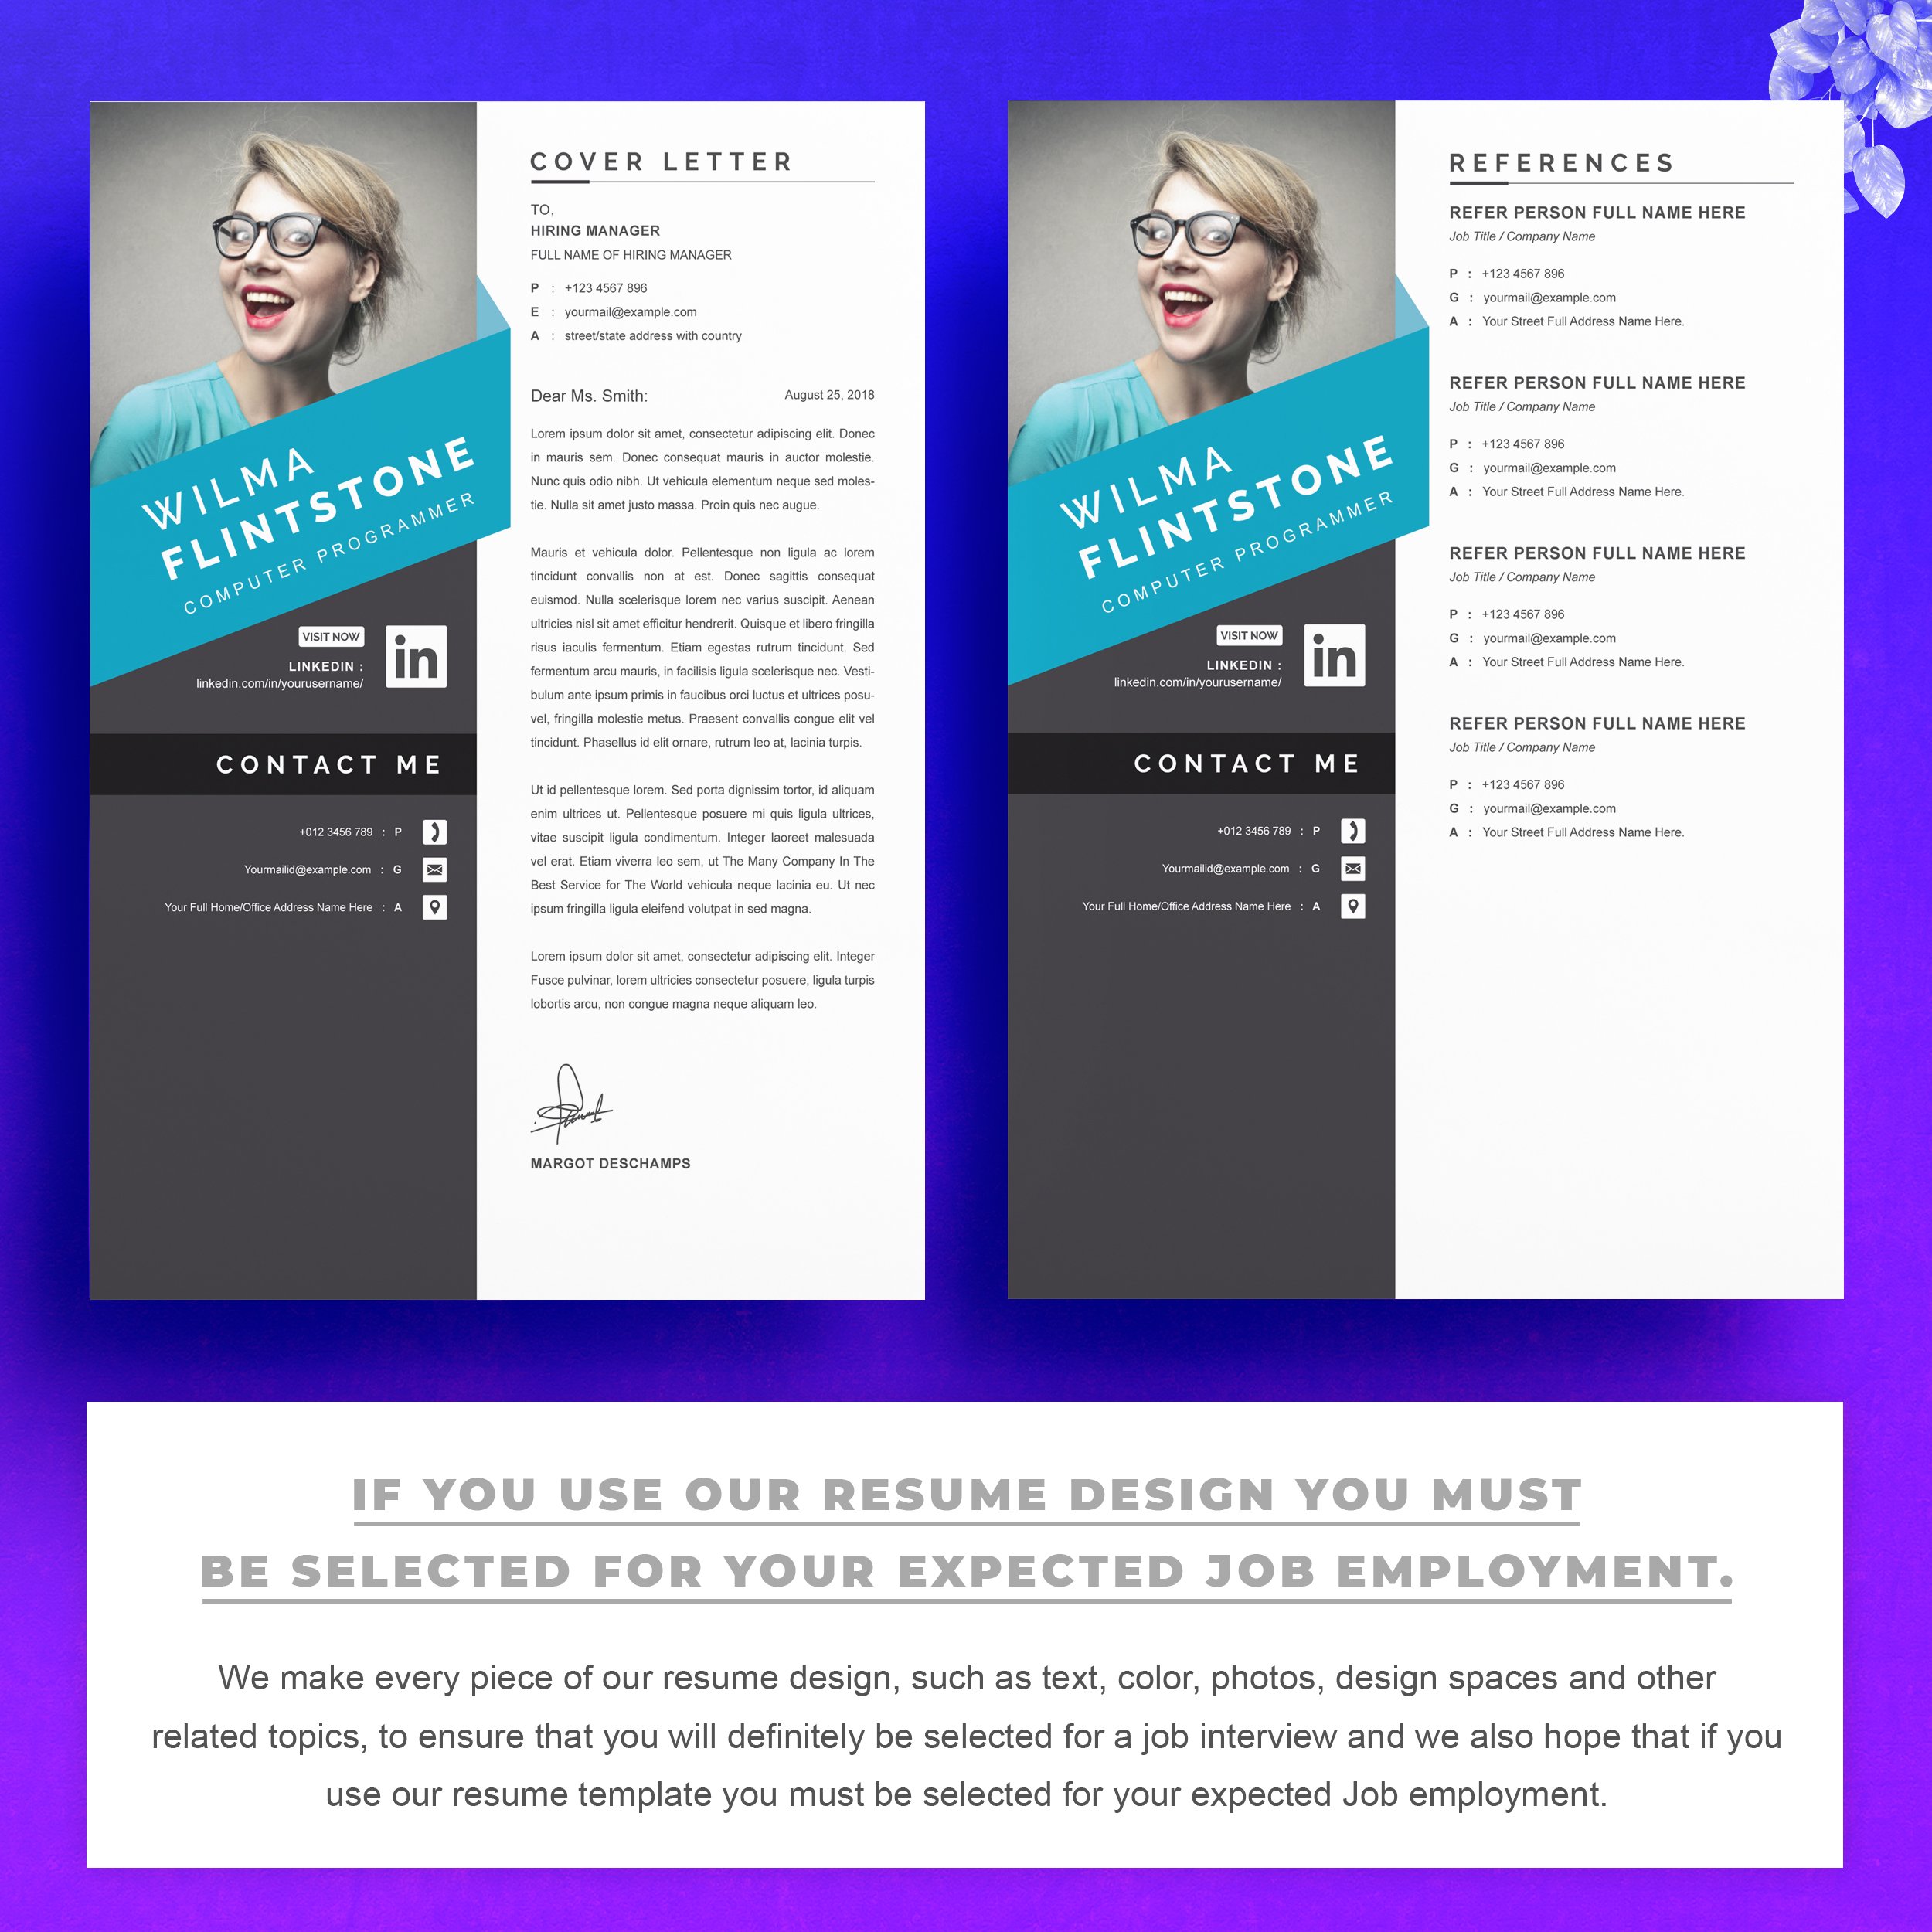 03 2 pages free resume design template copy 350